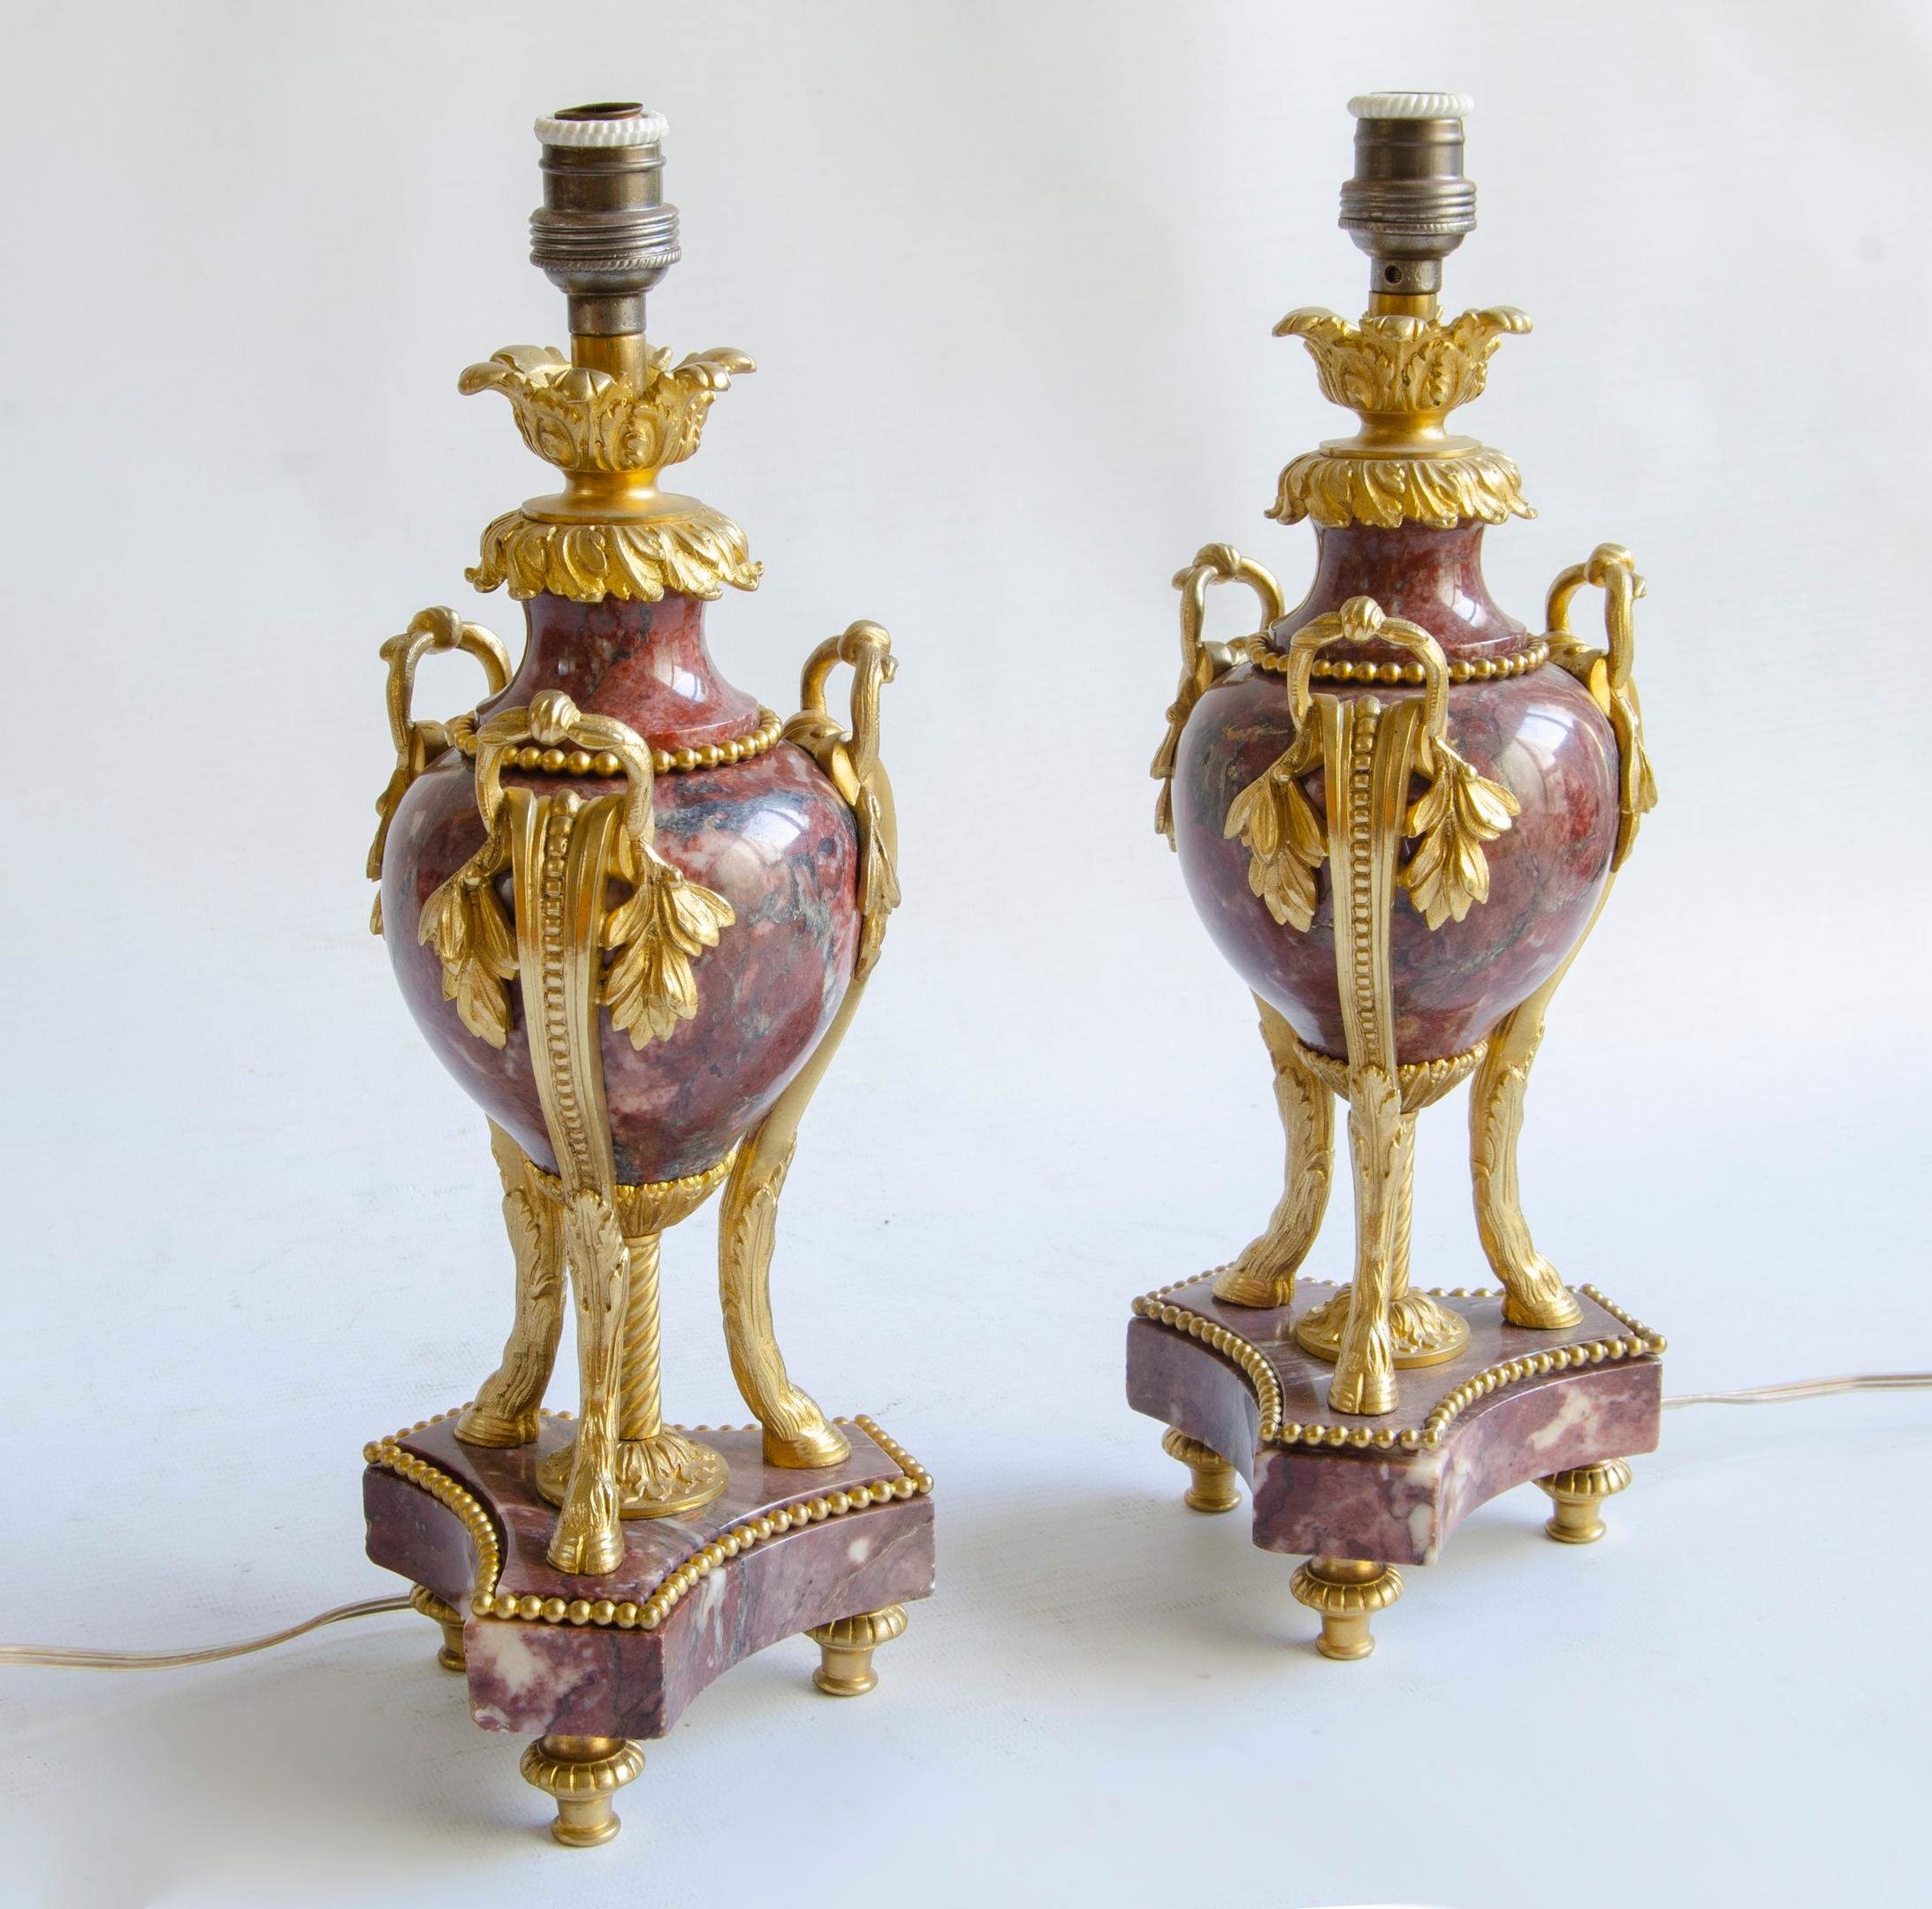 Pair of Empire lamps
materials: red marble and golden bronze
electrified 220 w,
circa 1920 origin France
original porcelain lamp holders.